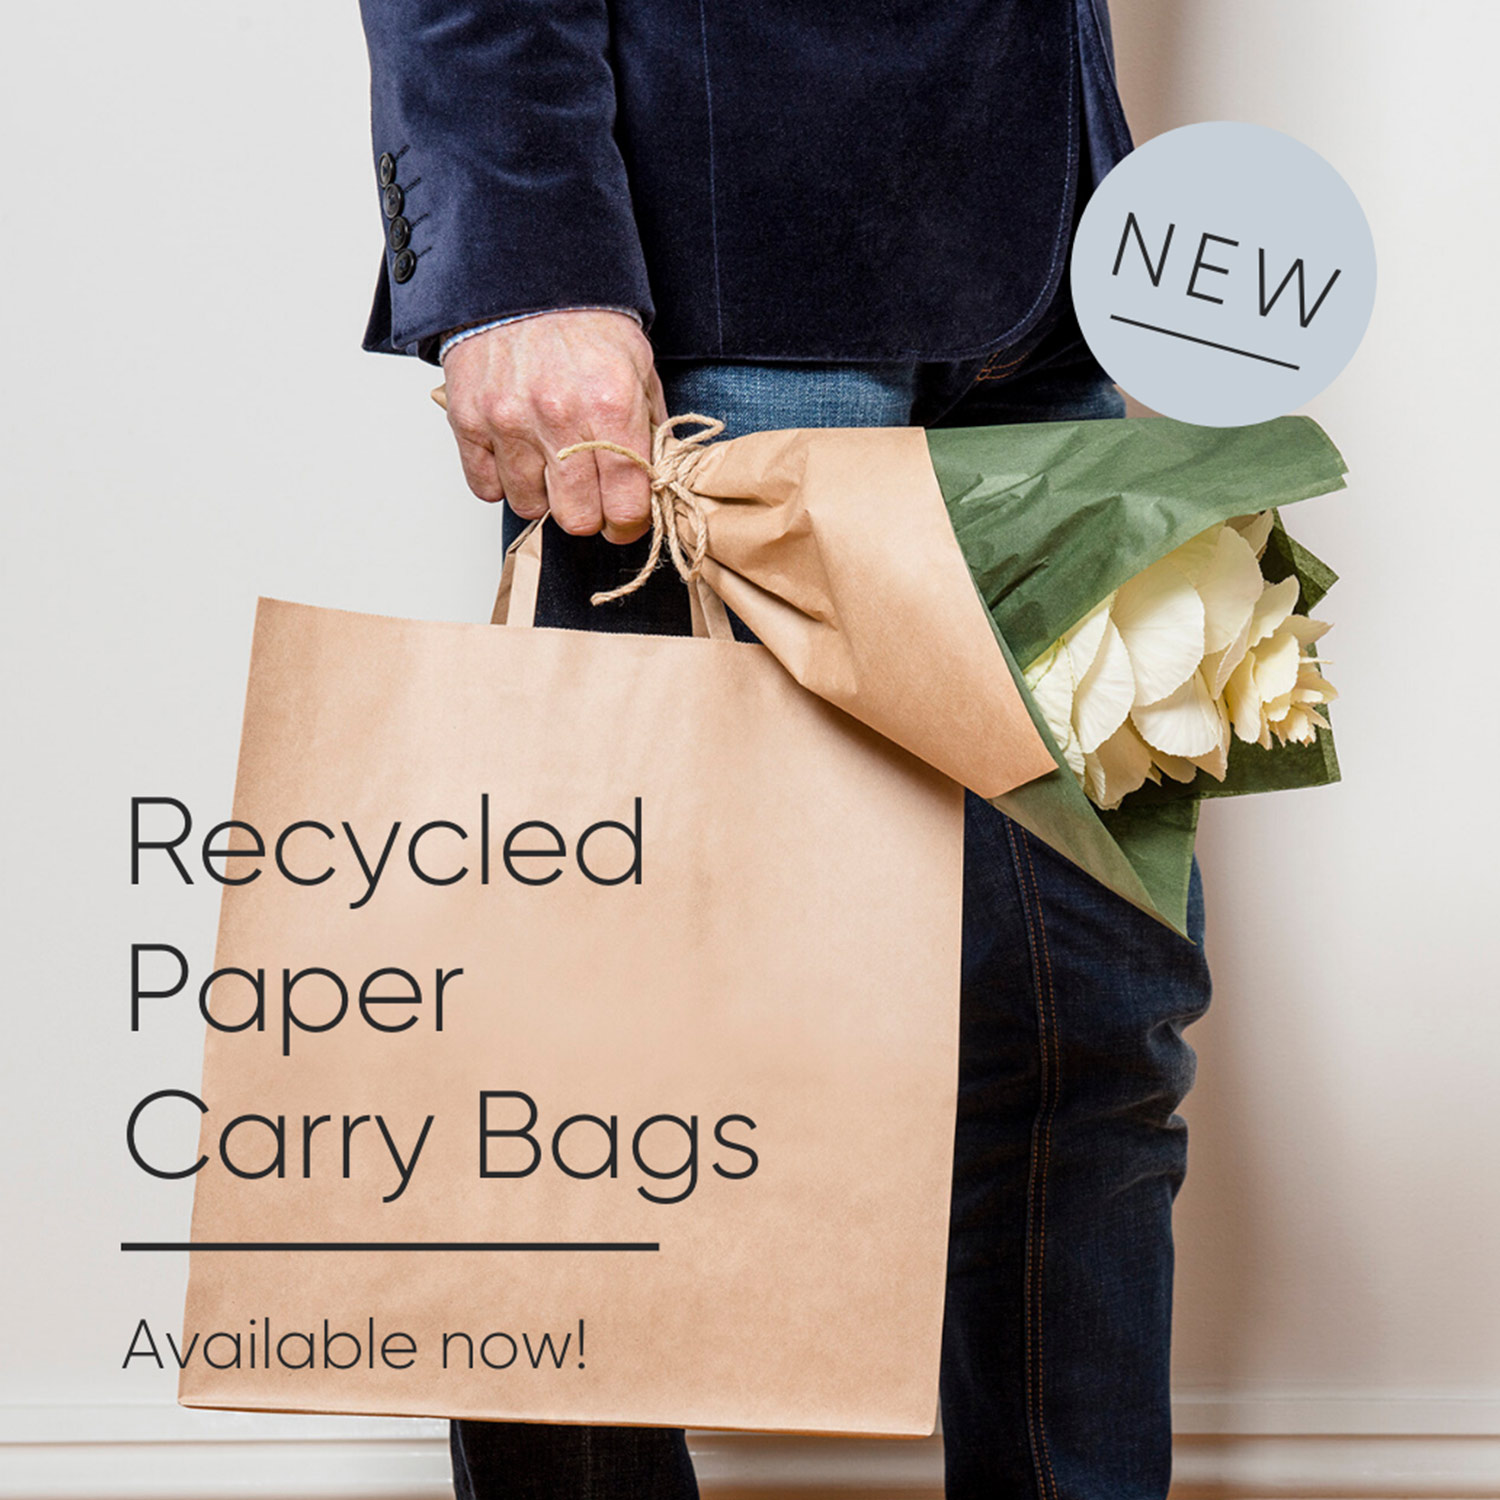 Introducing Recycled Content Carry Bags